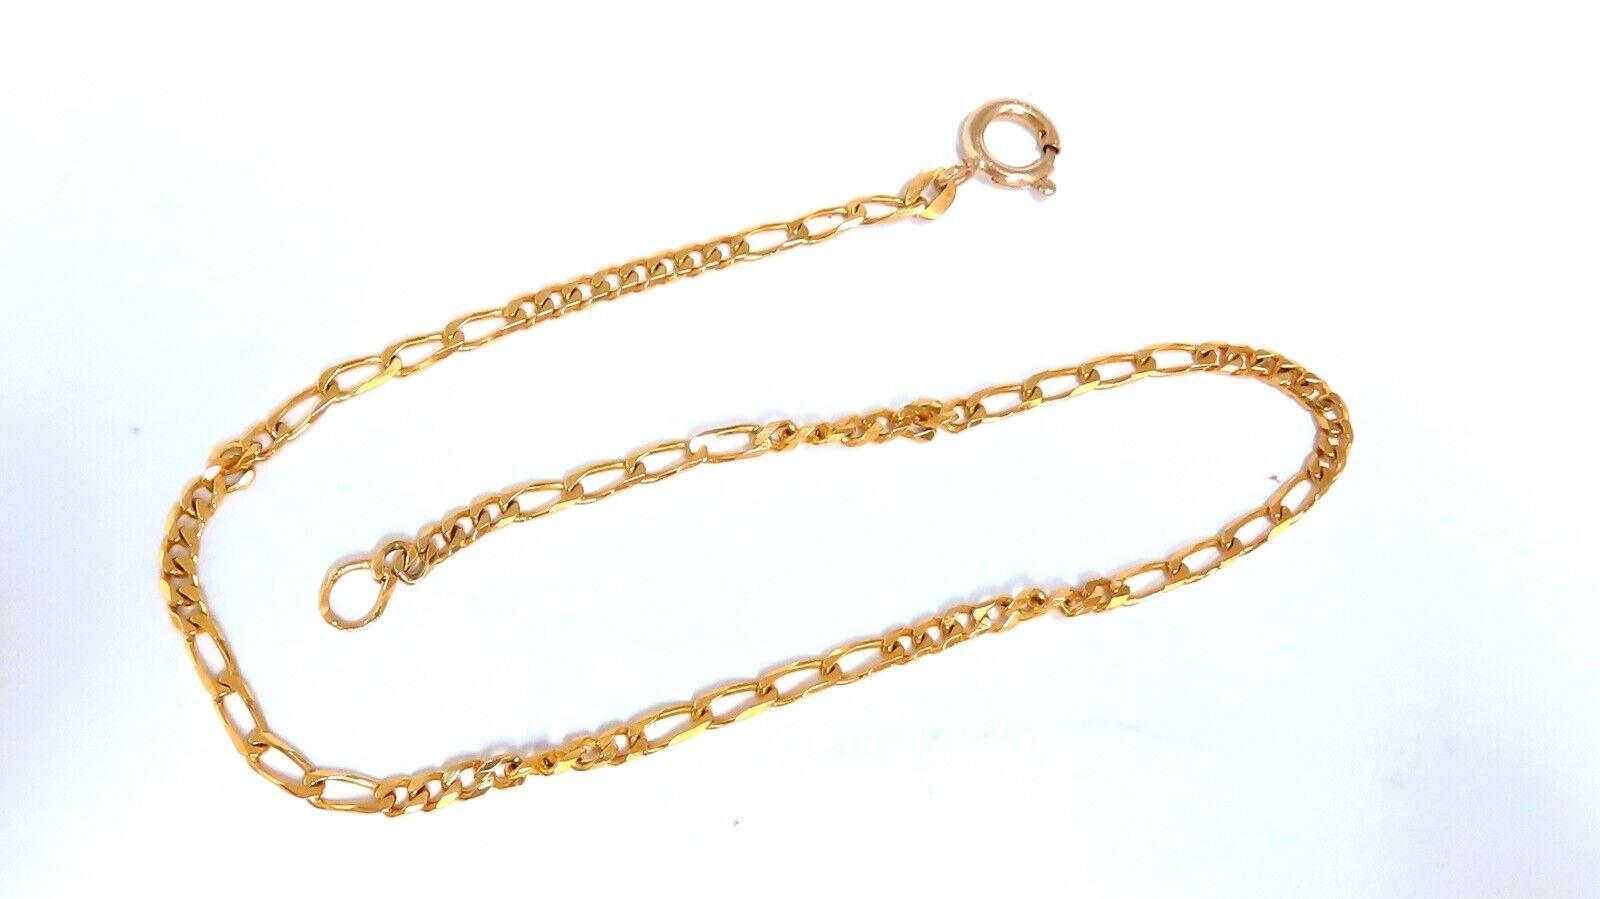 2.5 mm Figaro bracelet

Big and tall, 10 inch or can be worn as anklet

14 karat yellow gold

4.9 g